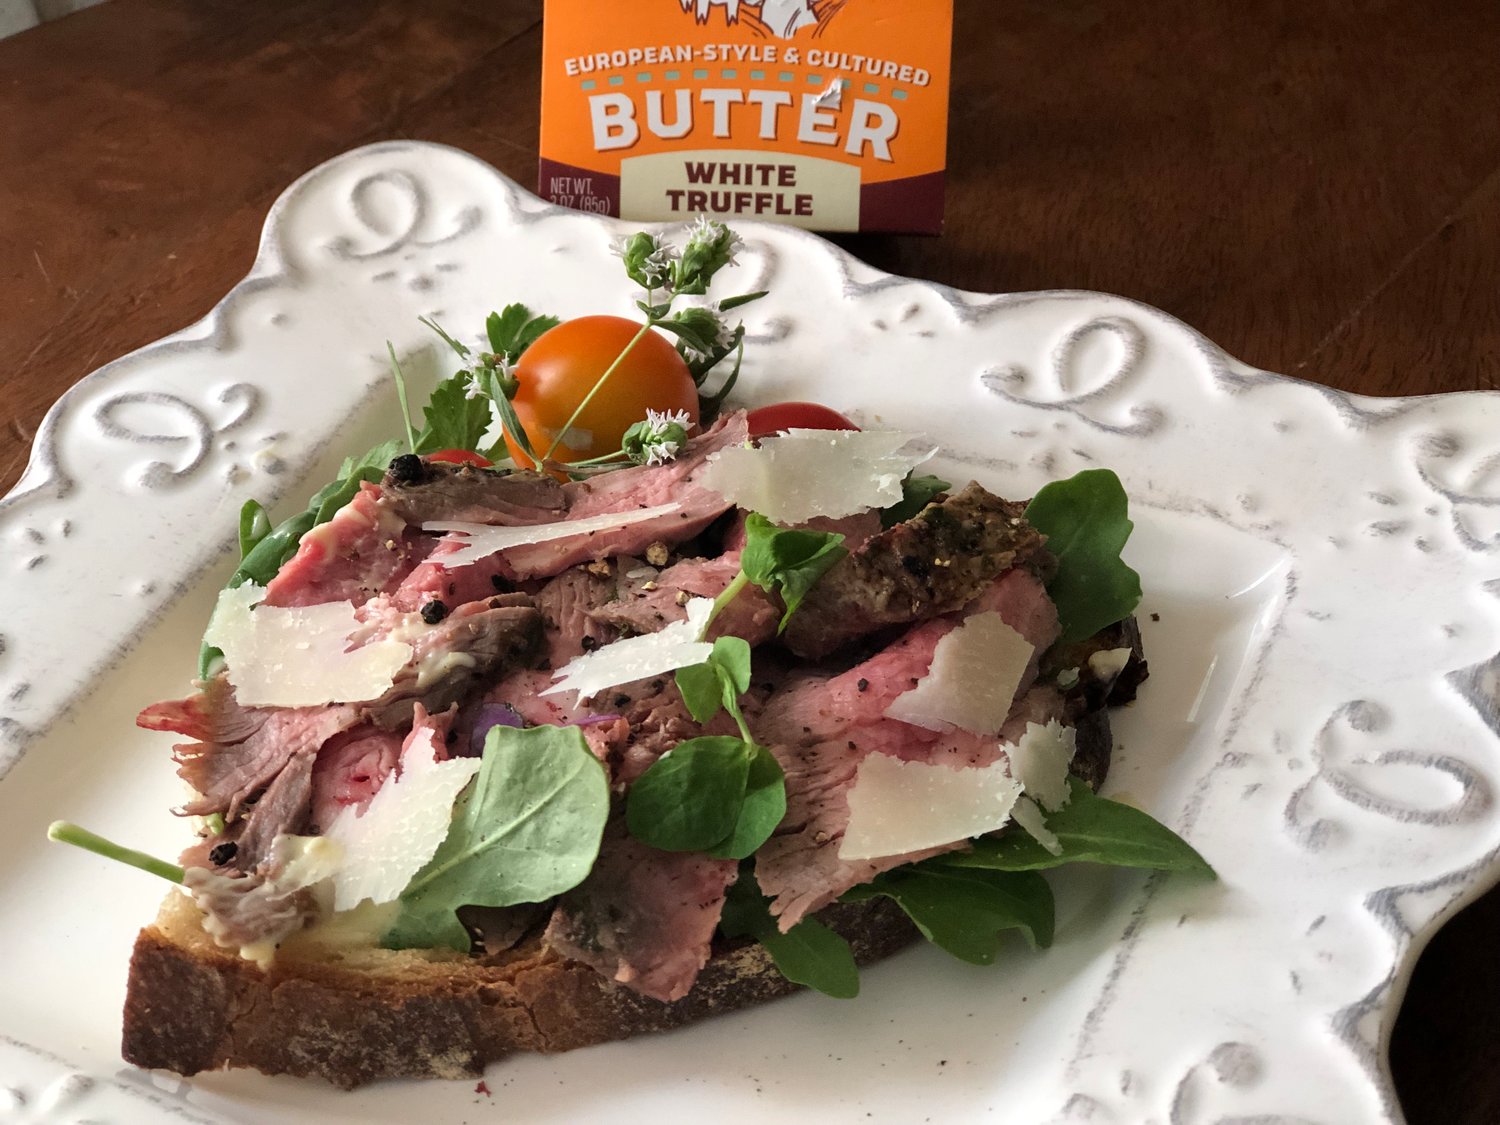 These open-face steak and truffle butter sandwiches are made with thinly-sliced leftover steak and topped with shaved Parmigiano-Reggiano cheese.